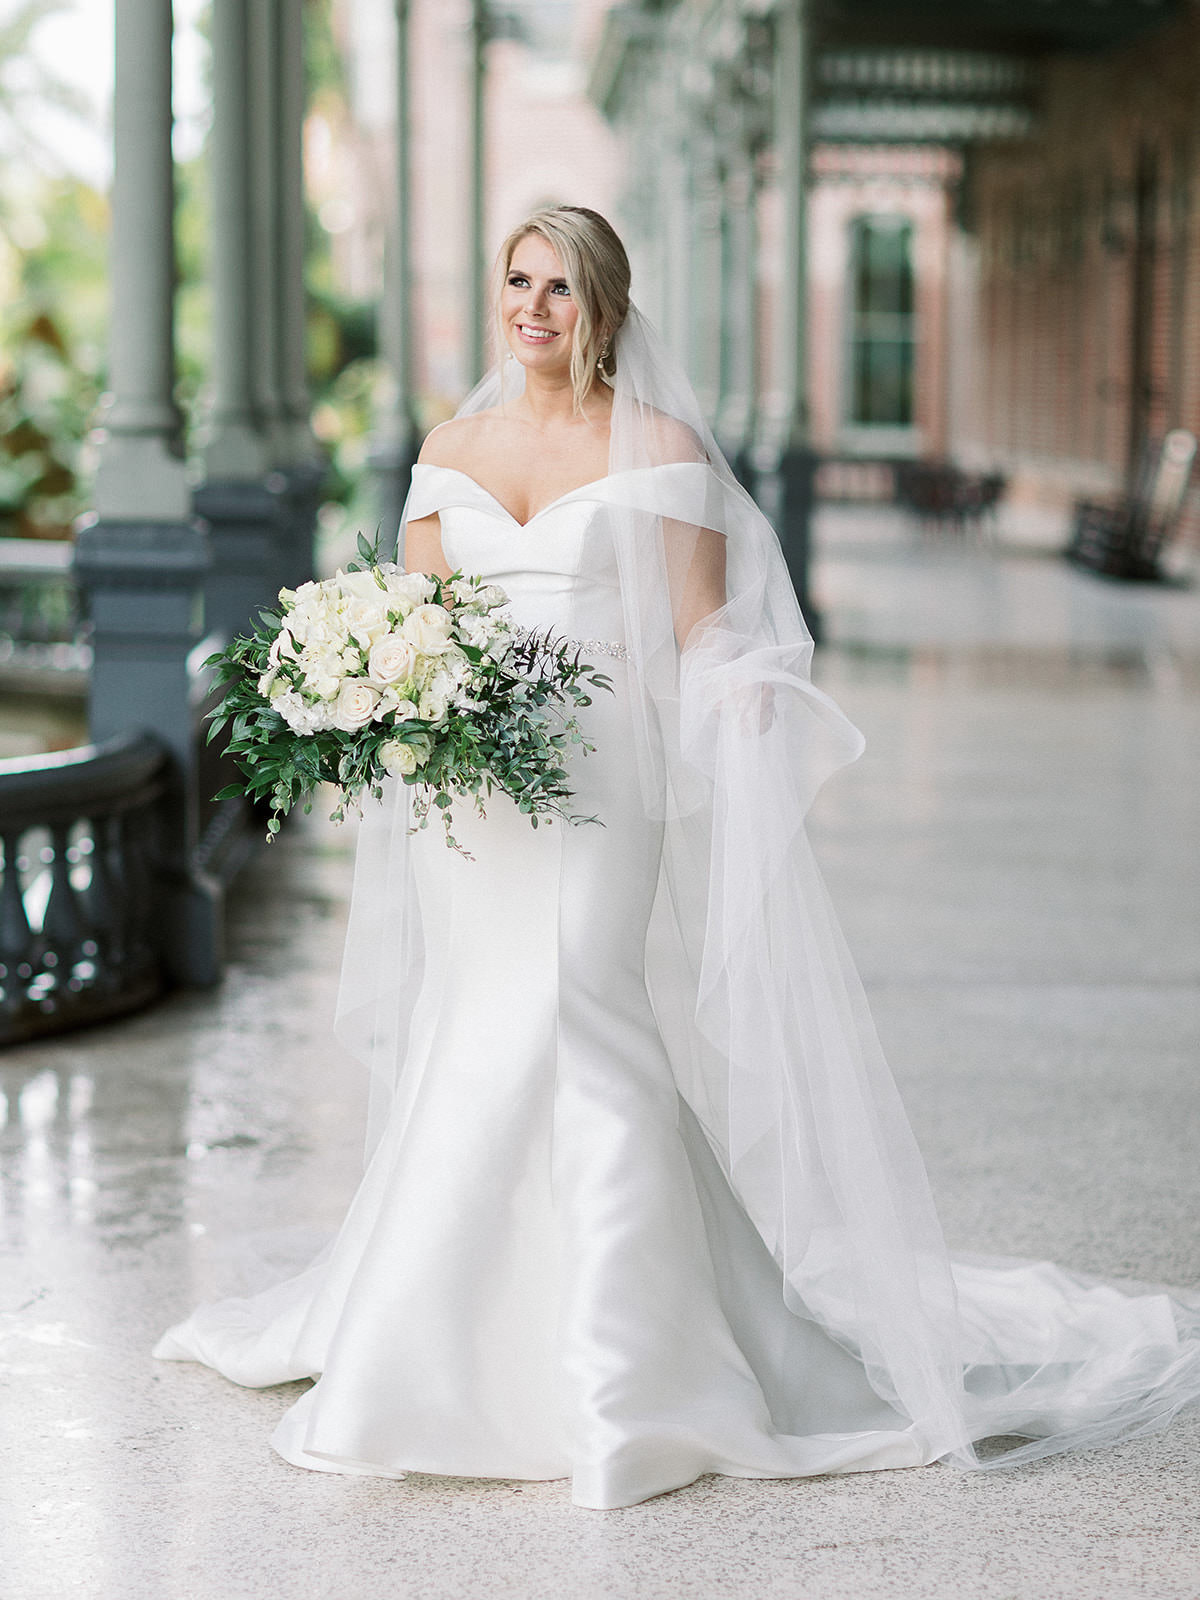 White Rose and Ruscus Greenery Bridal Bouquet | Elegant White Ivory Satin Off the Shoulder Fit and Flare Maggie Sottero Wedding Dress | Cathedral Length Veil